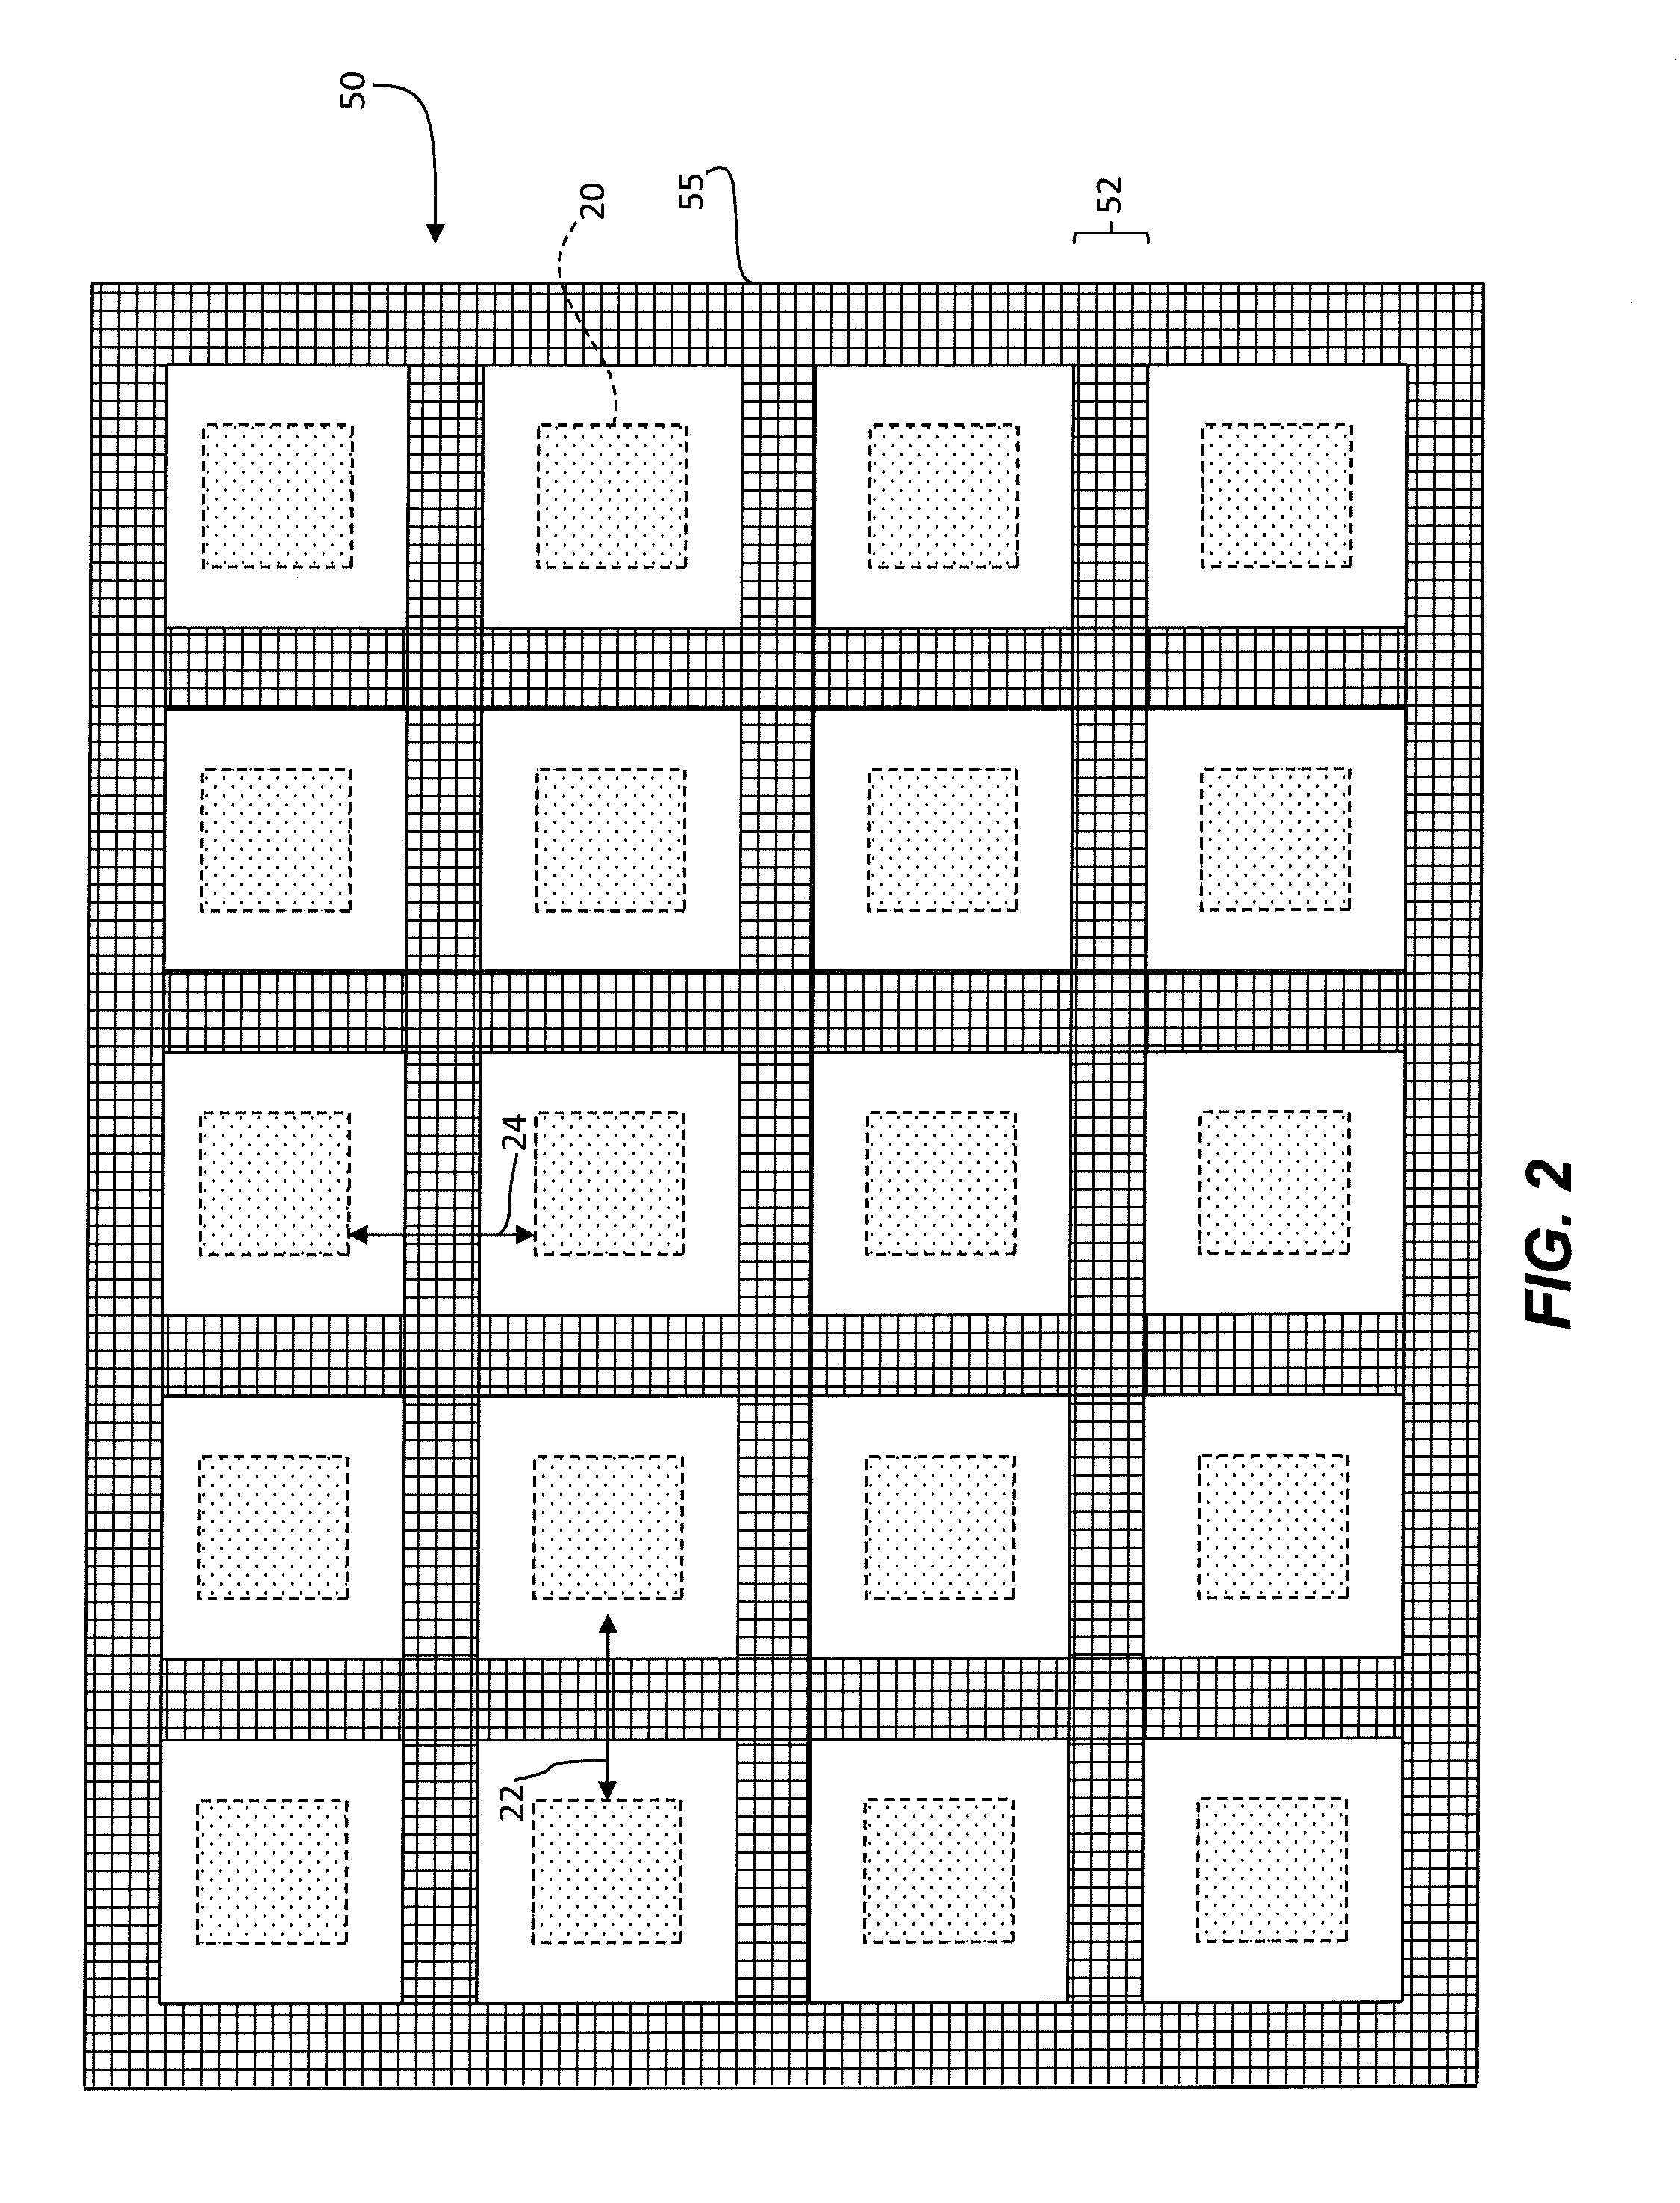 Display apparatus with pixel-aligned ground mesh